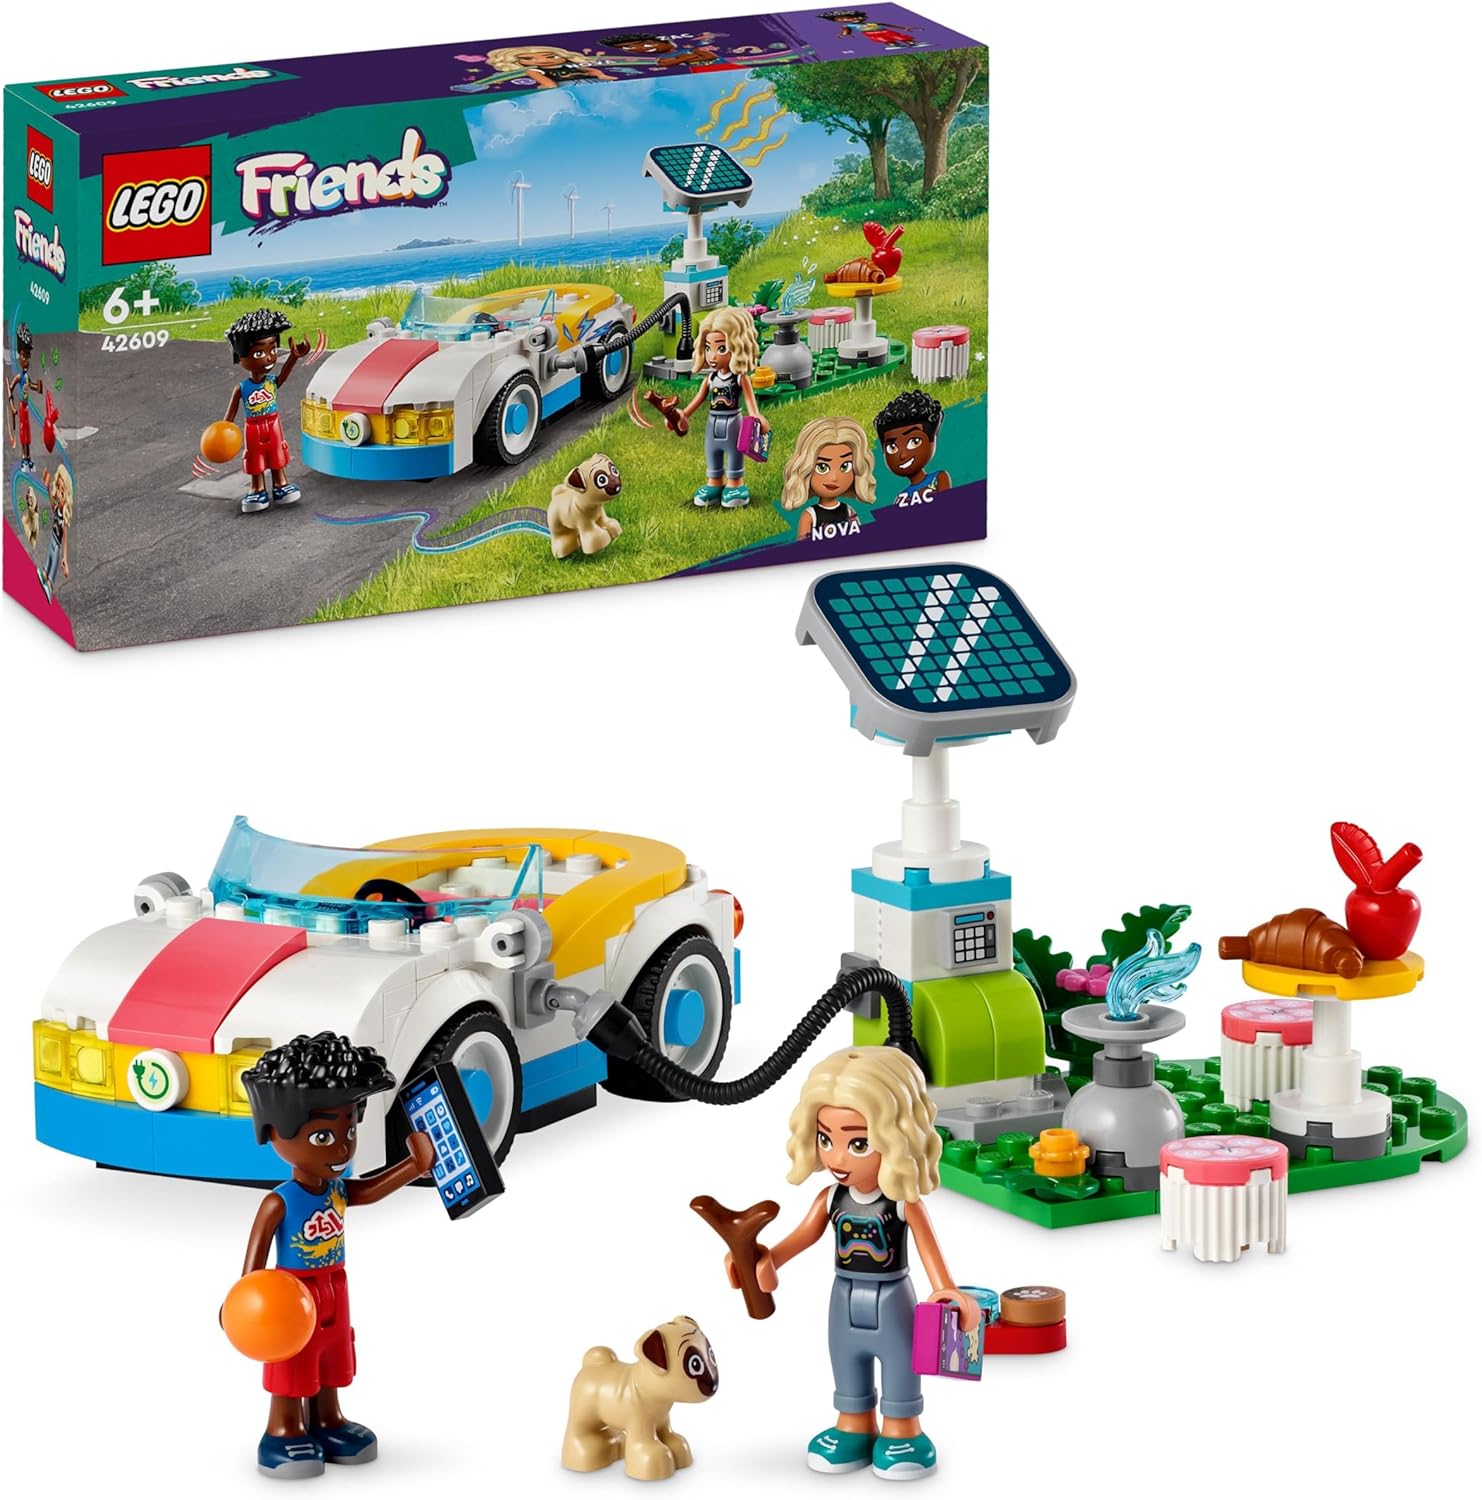 LEGO Friends 42609 Electric Car with Charging Station, Electric Car for Children, Car Toy for Role Play with Nova and Zac Figures, Small Set, Gift for Girls and Boys from 6 Years